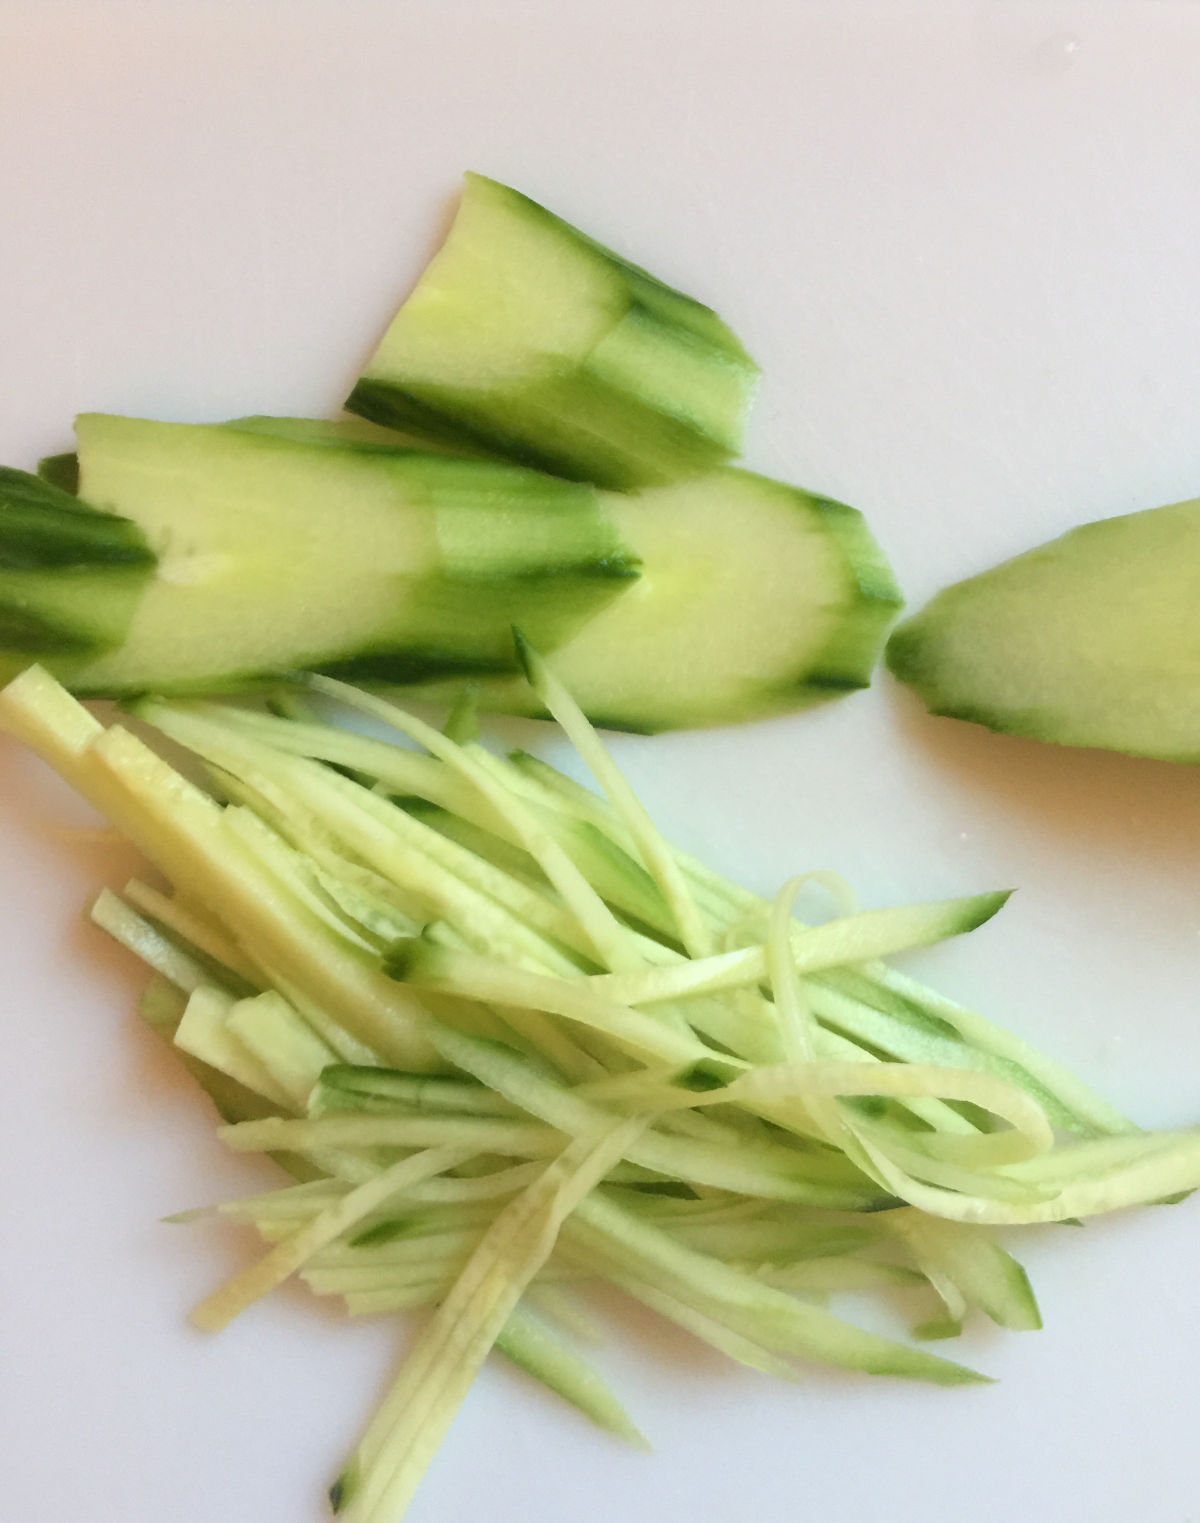 Peeled English cucumber cut into slices and thin matchstick-sized strips on a white cutting board.